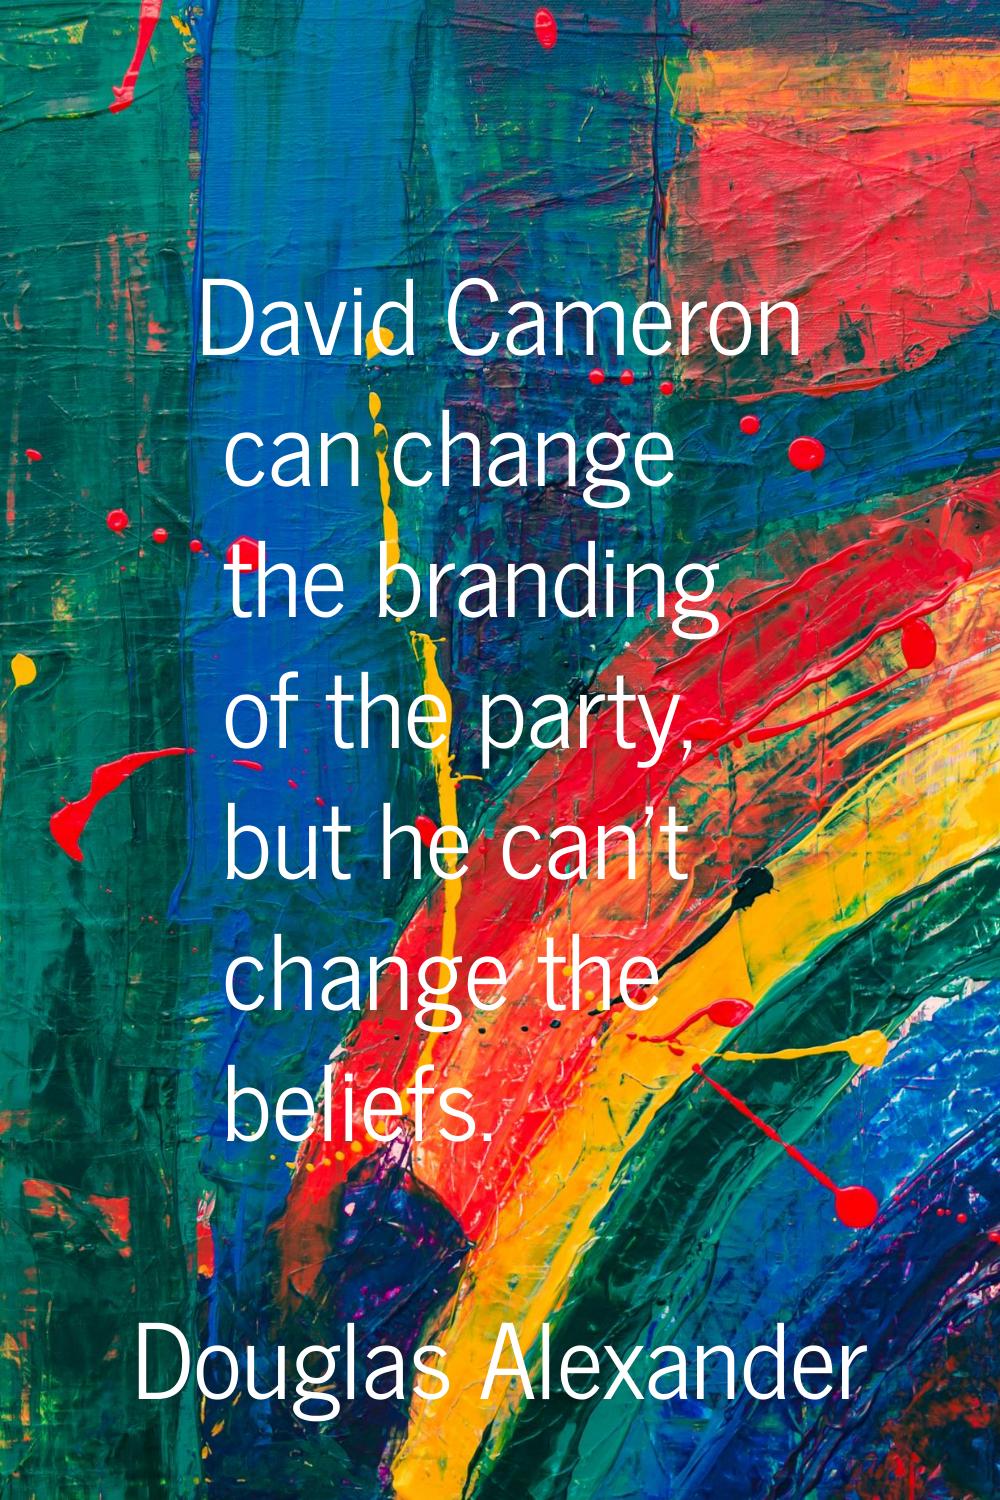 David Cameron can change the branding of the party, but he can't change the beliefs.